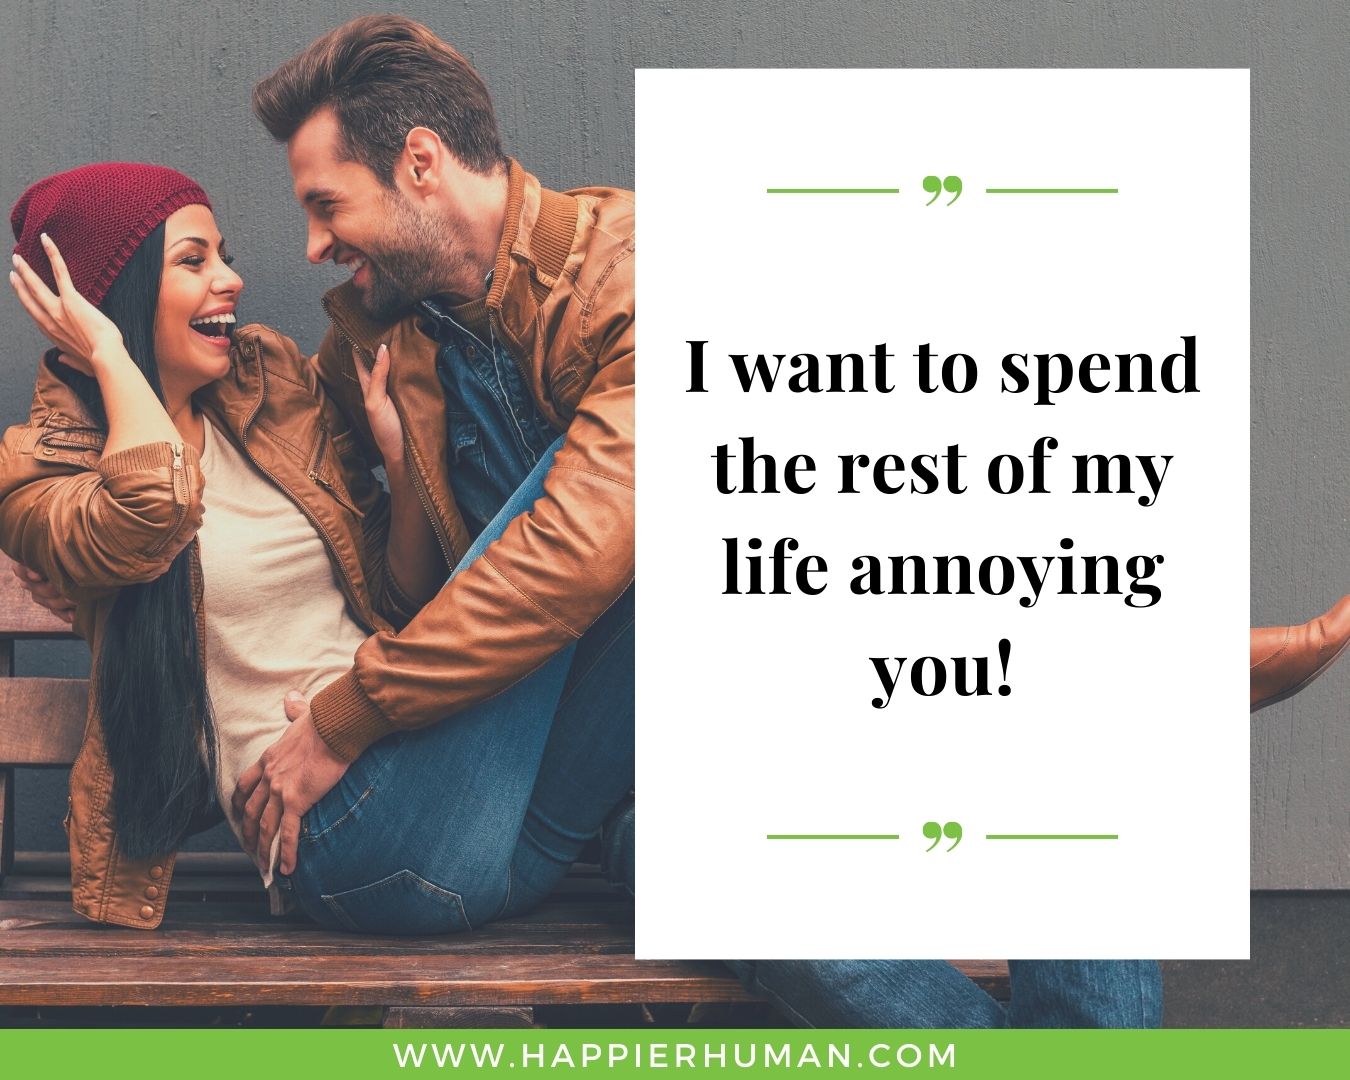 Funny Love Quotes for Her - “I want to spend the rest of my life annoying you!”